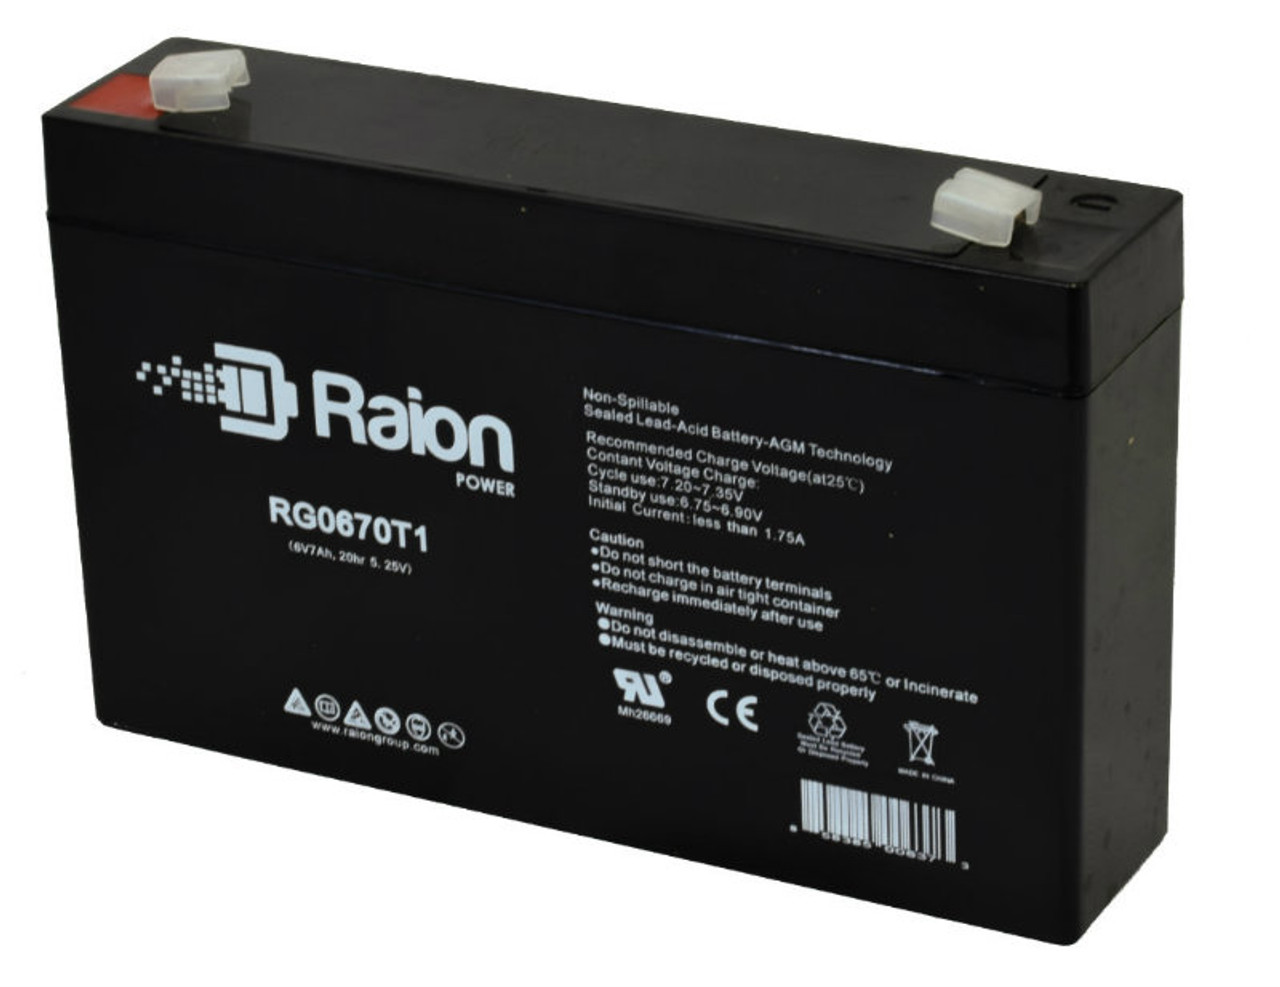 Raion Power RG0670T1 6V 7Ah Replacement Battery Cartridge for Ivy Biomedical System 702 ECG MONITOR Medical Equipment